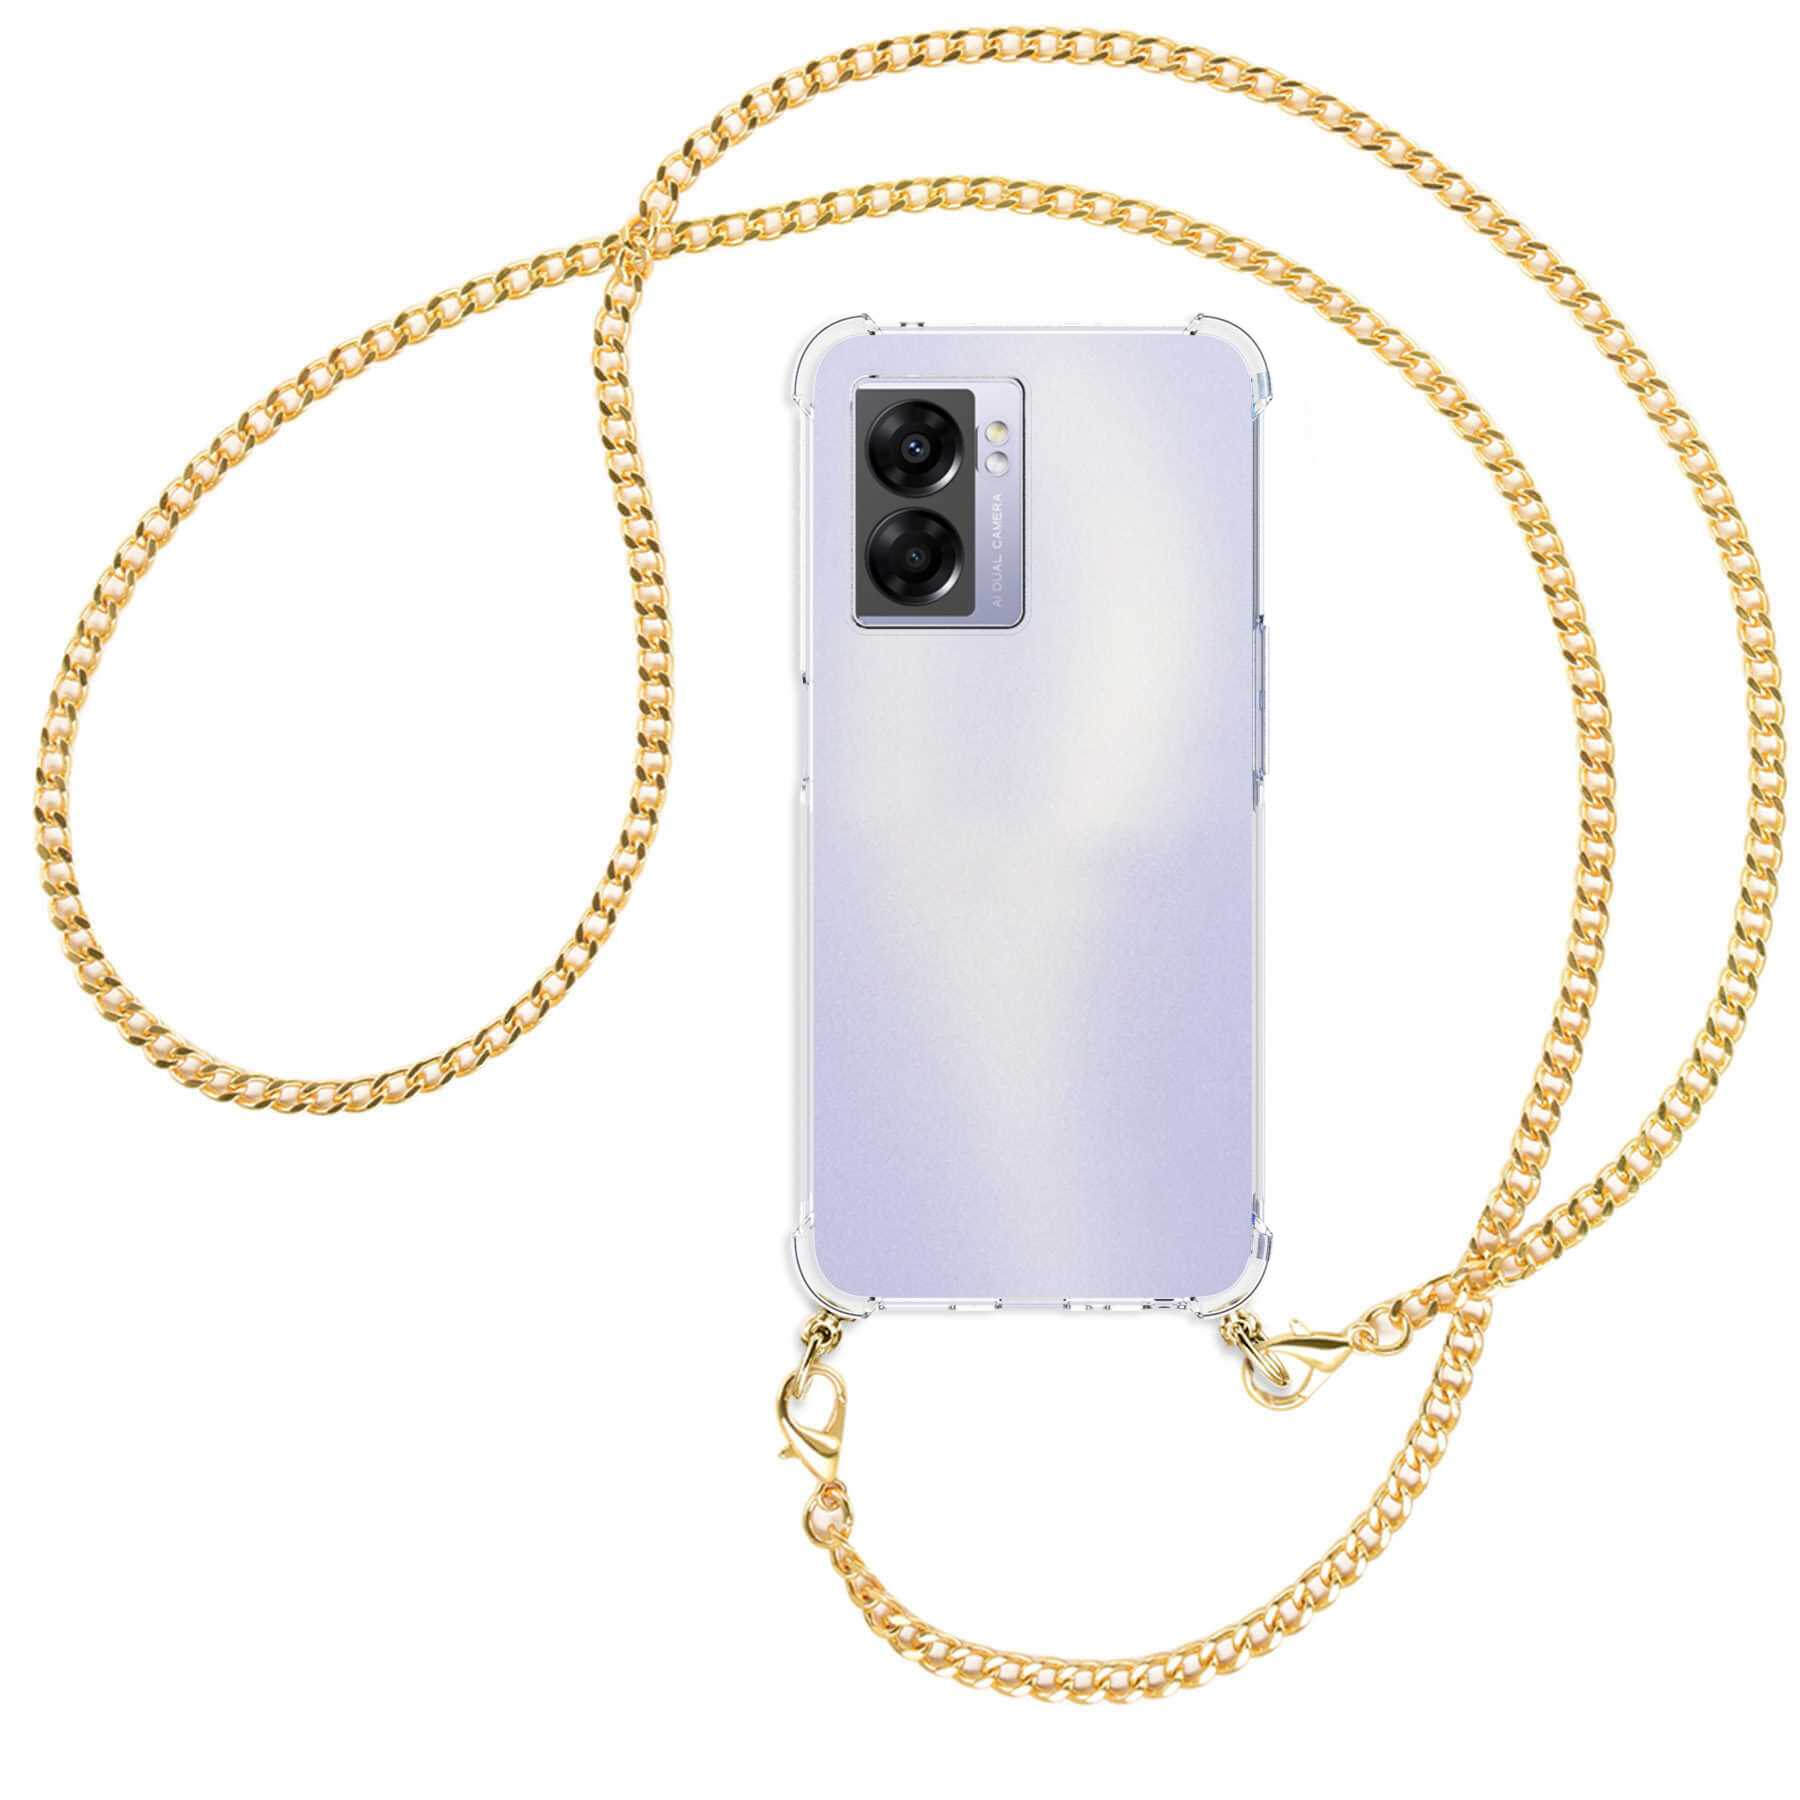 MTB MORE Umhänge-Hülle A77 5G, Oppo, Metallkette, A57 5G, 5G, Backcover, ENERGY mit Realme (gold) Kette 50 Narzo